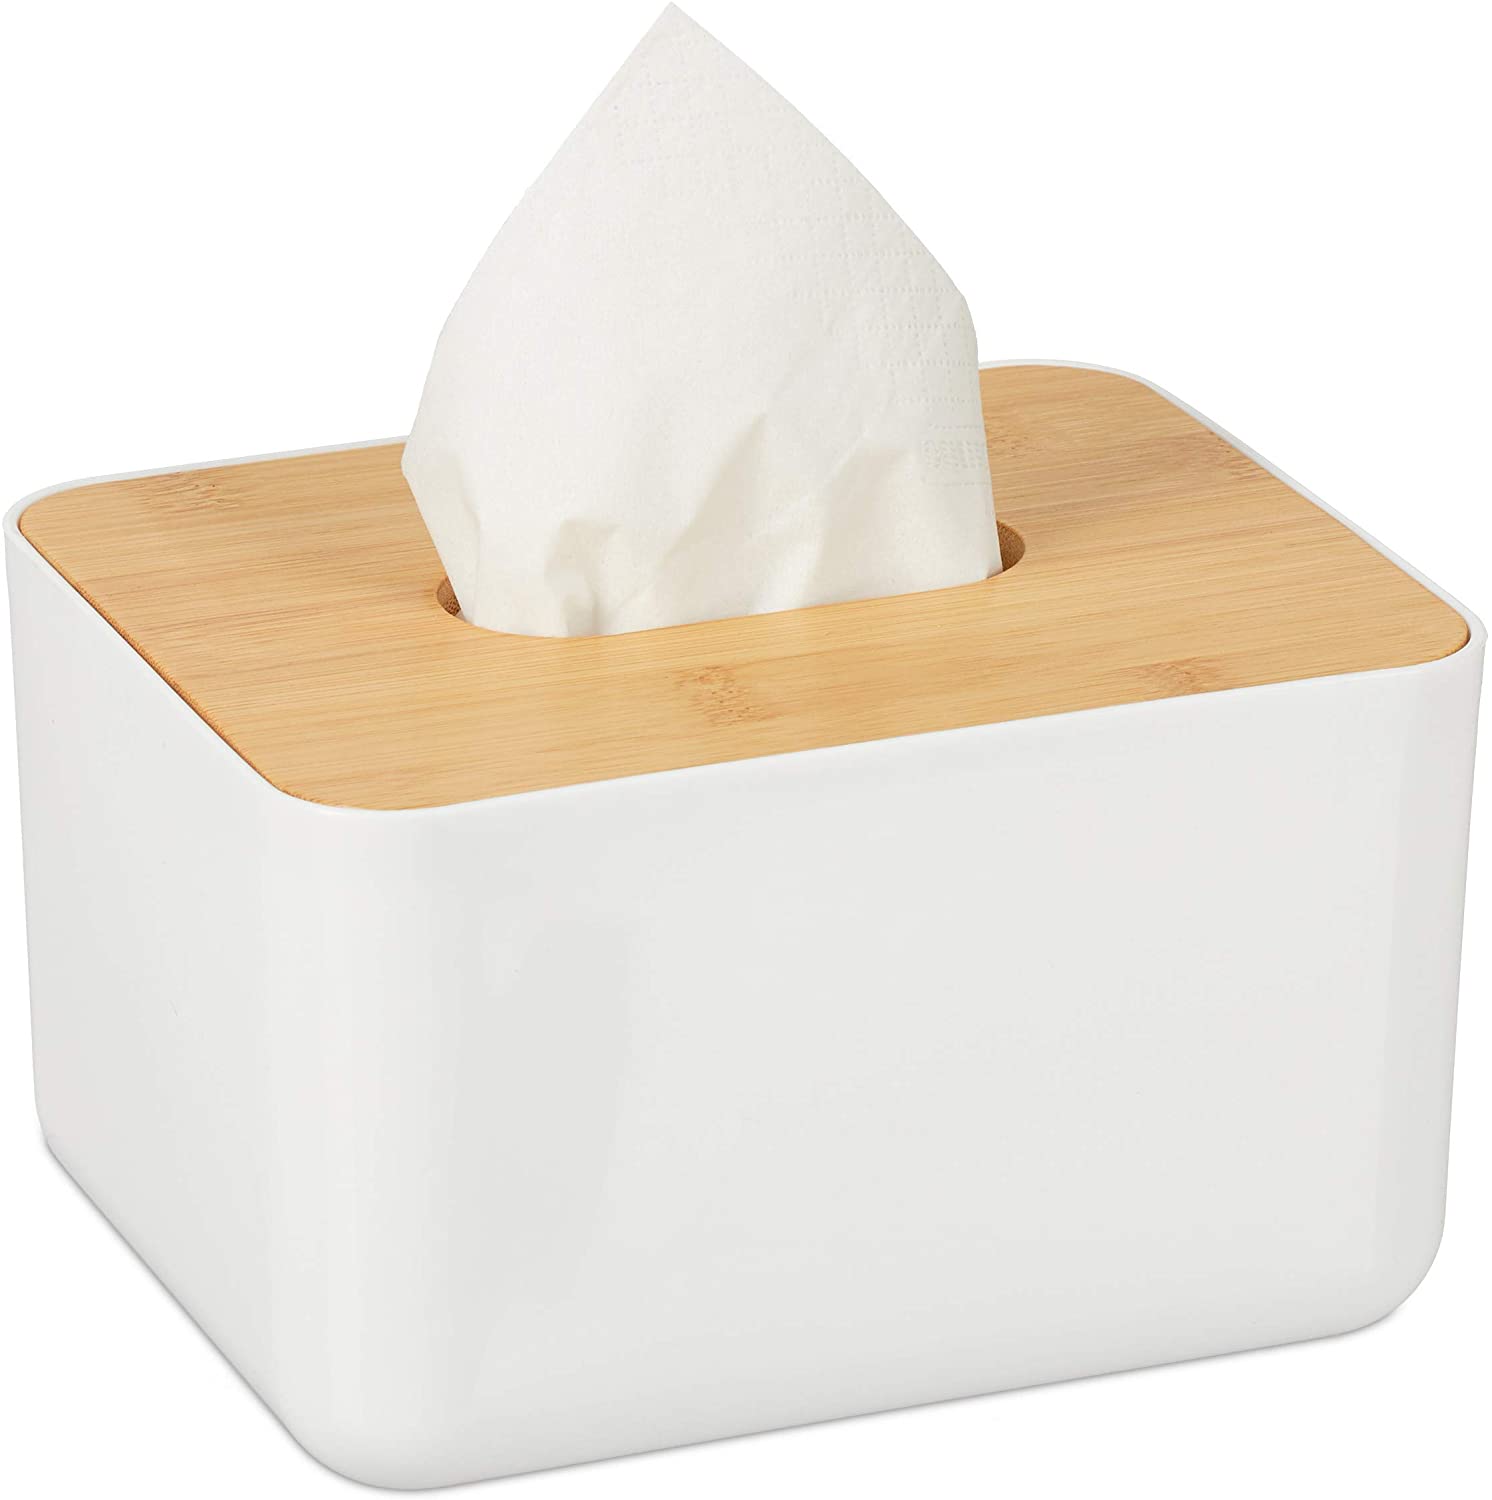 Relaxdays Tissue Box With Bamboo Lid For Bathroom Modern Design Plastic H X